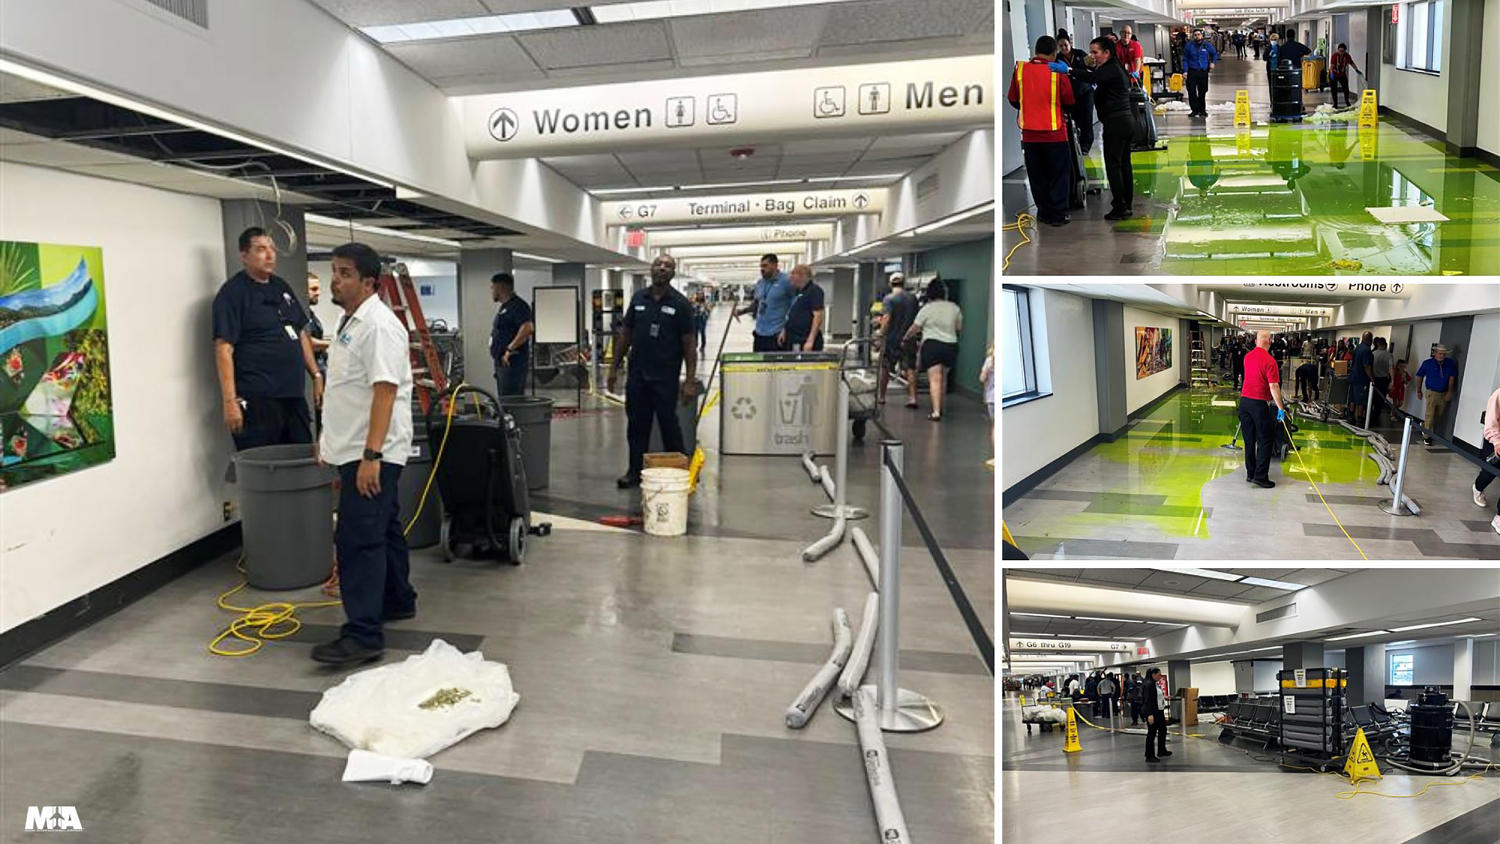 Bright green fluid gushed from Miami International Airport ceiling on July 4th, flooding concourse 